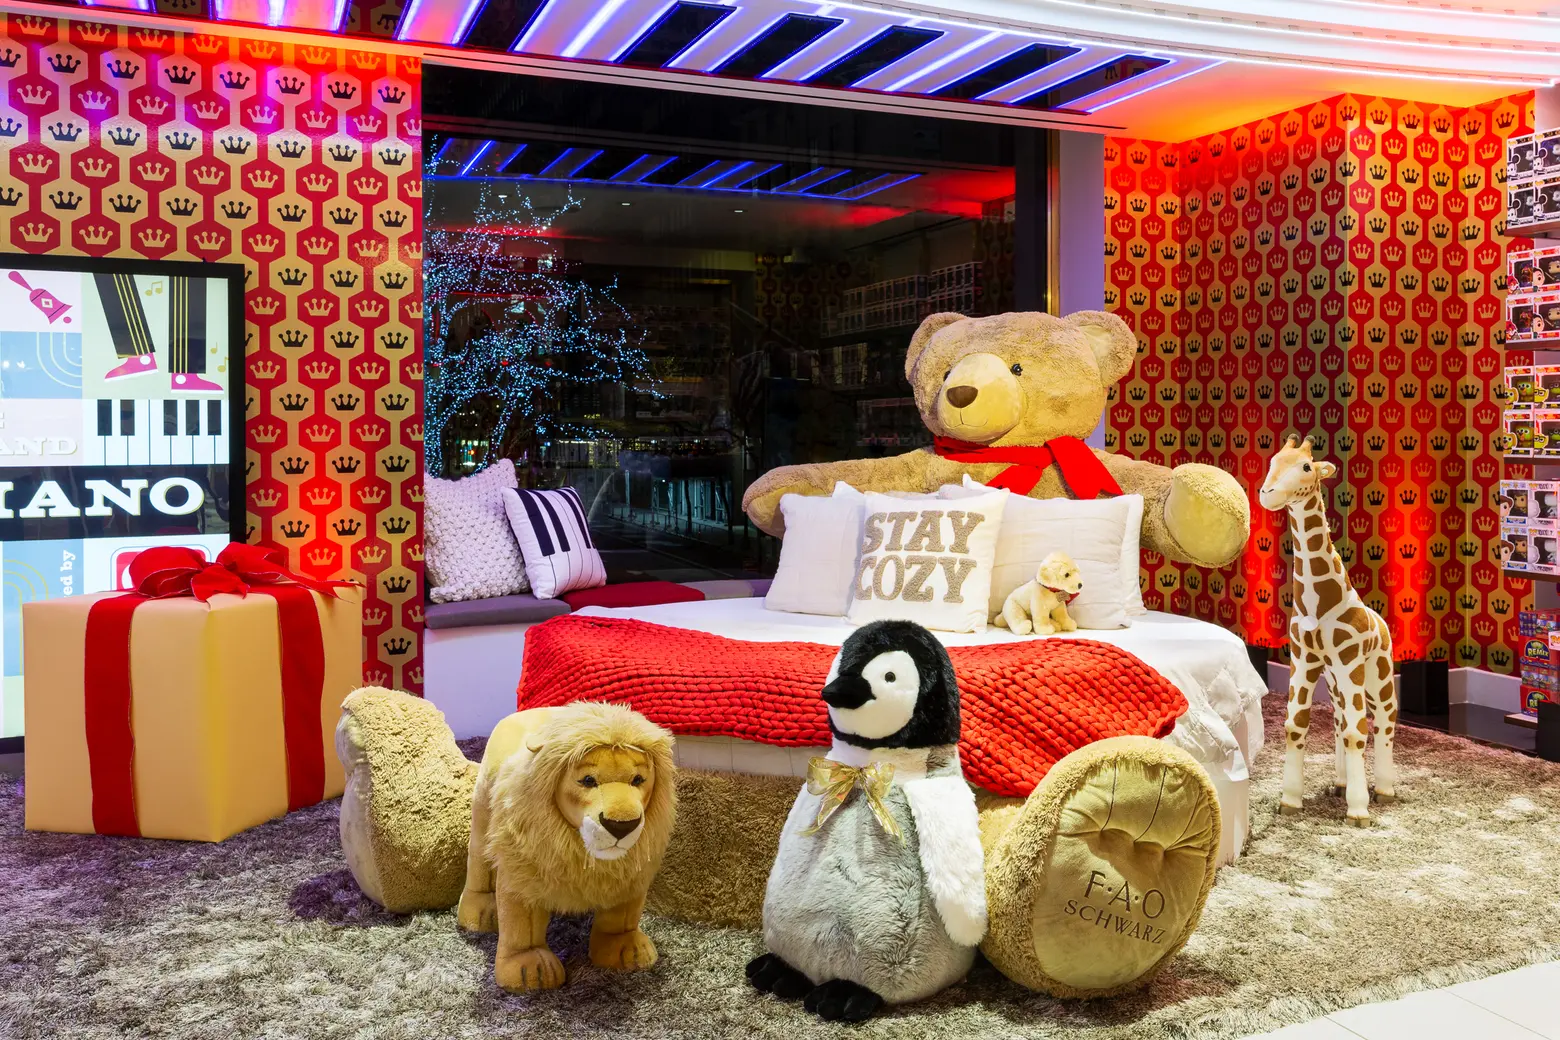 I spent an hour inside FAO Schwarz all by myself—here's what it was like